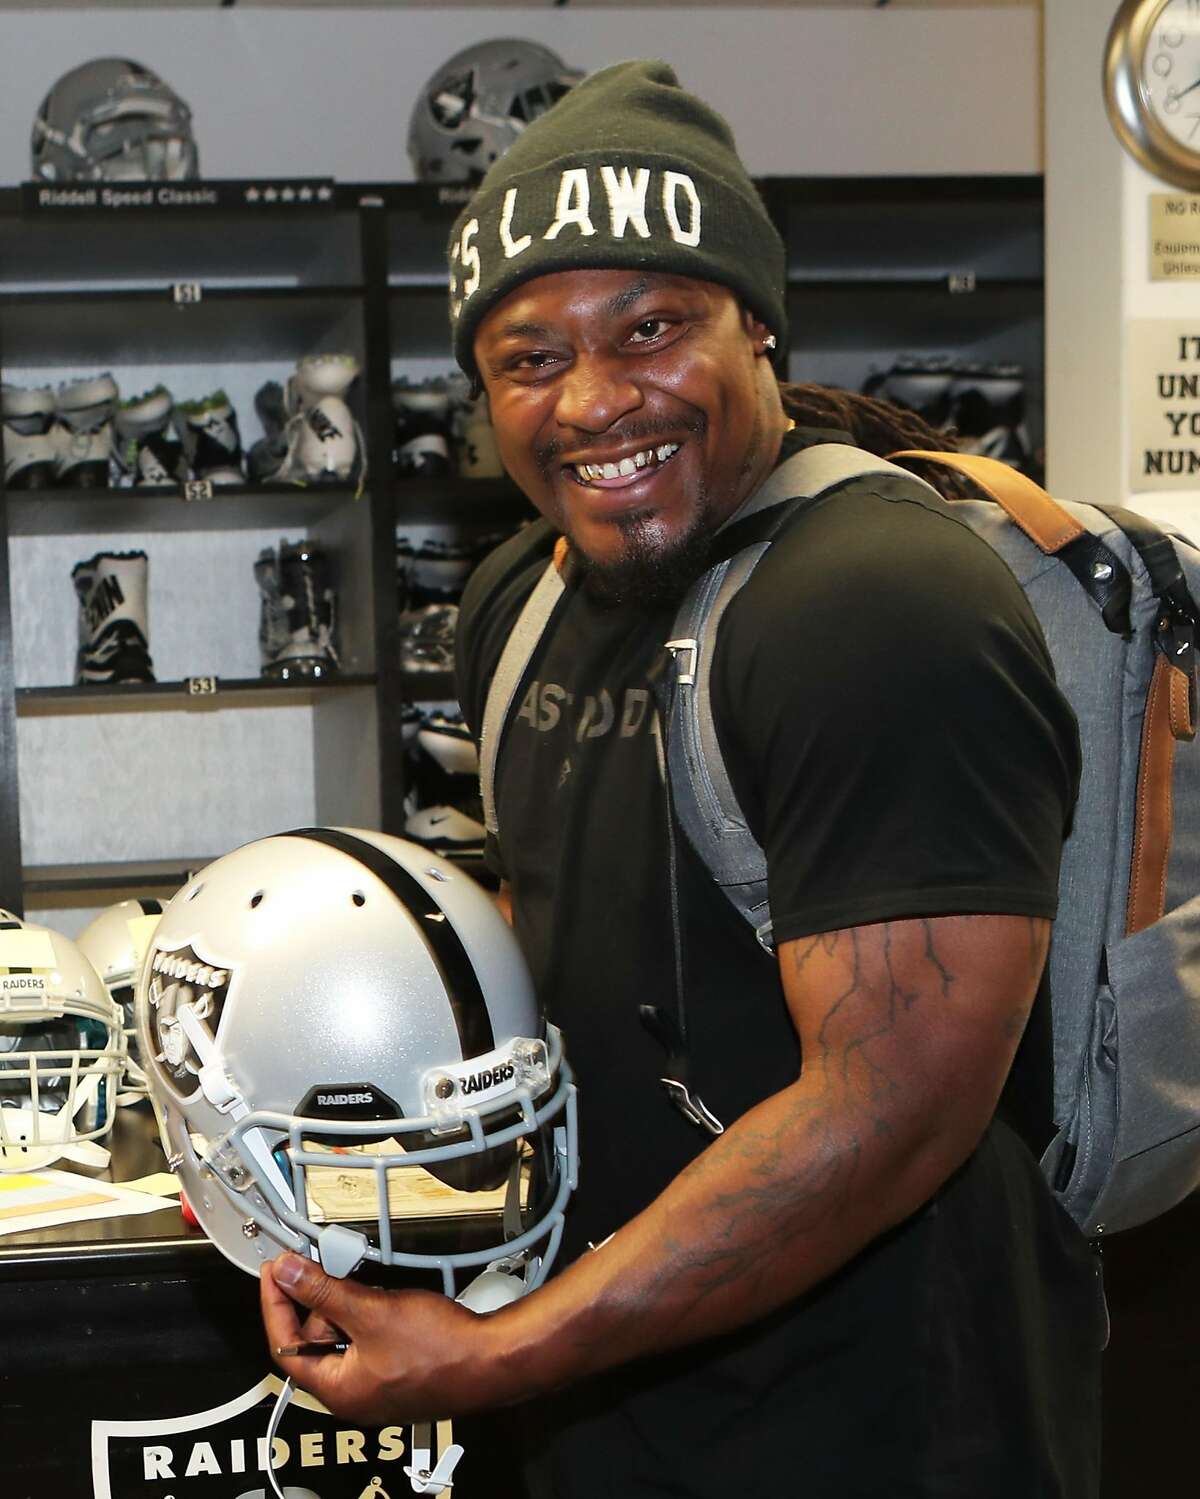 Oakland native and Cal alum Marshawn Lynch was all smiles after agreeing to a two-year deal with the Raiders earlier this year.